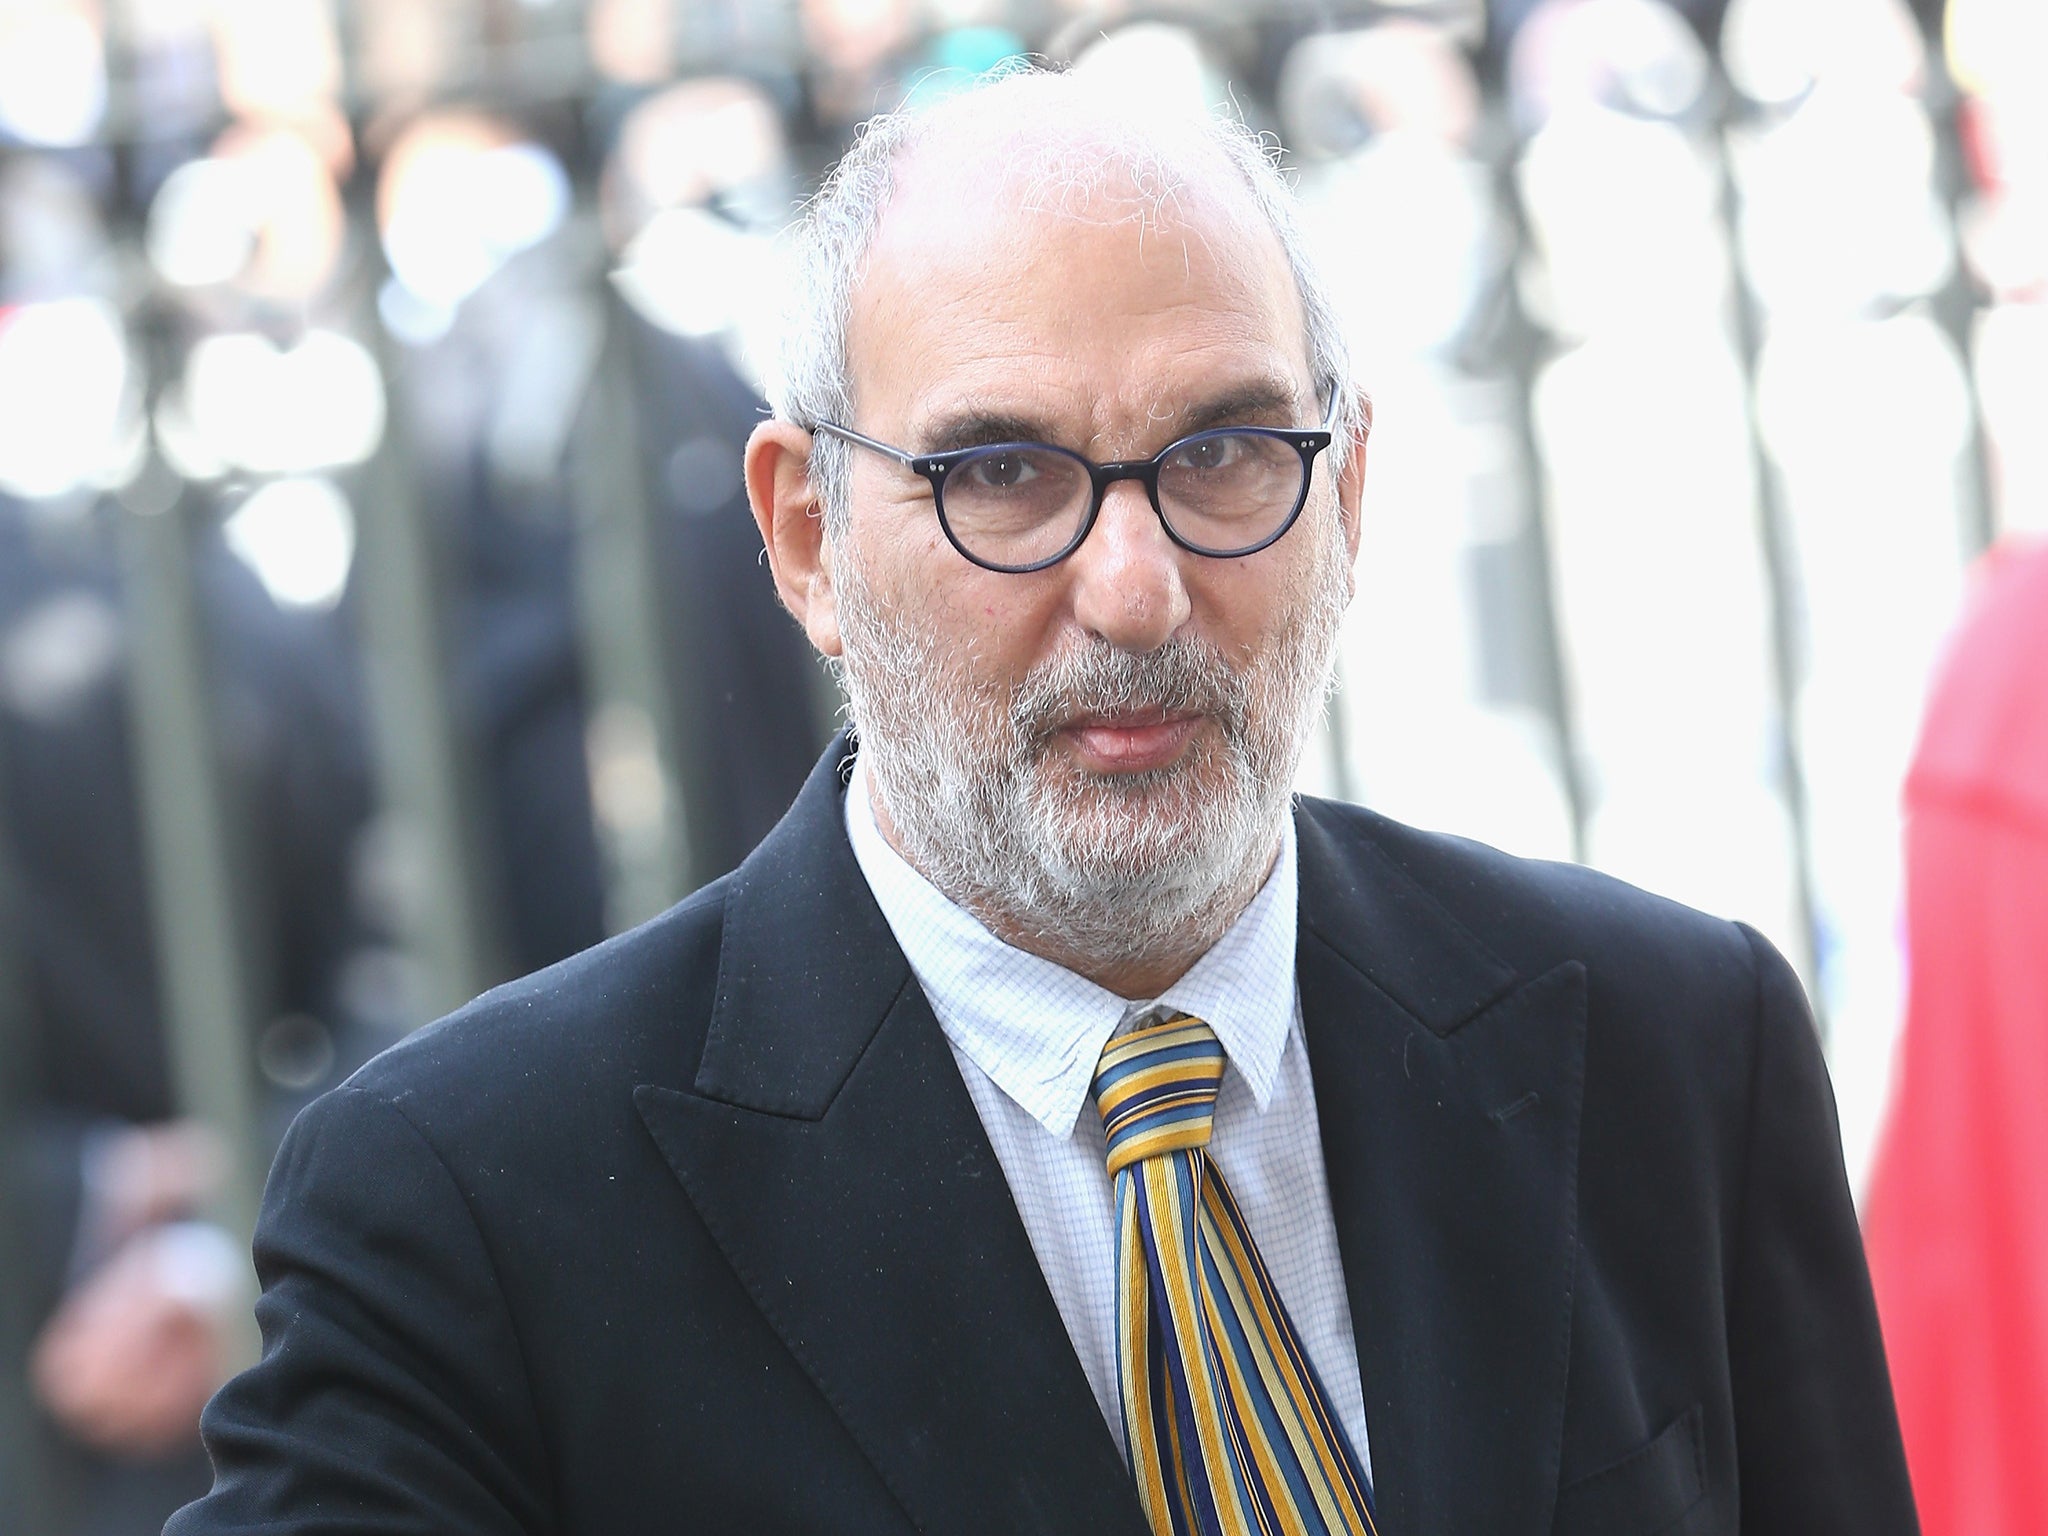 Alan Yentob defended the charity's work